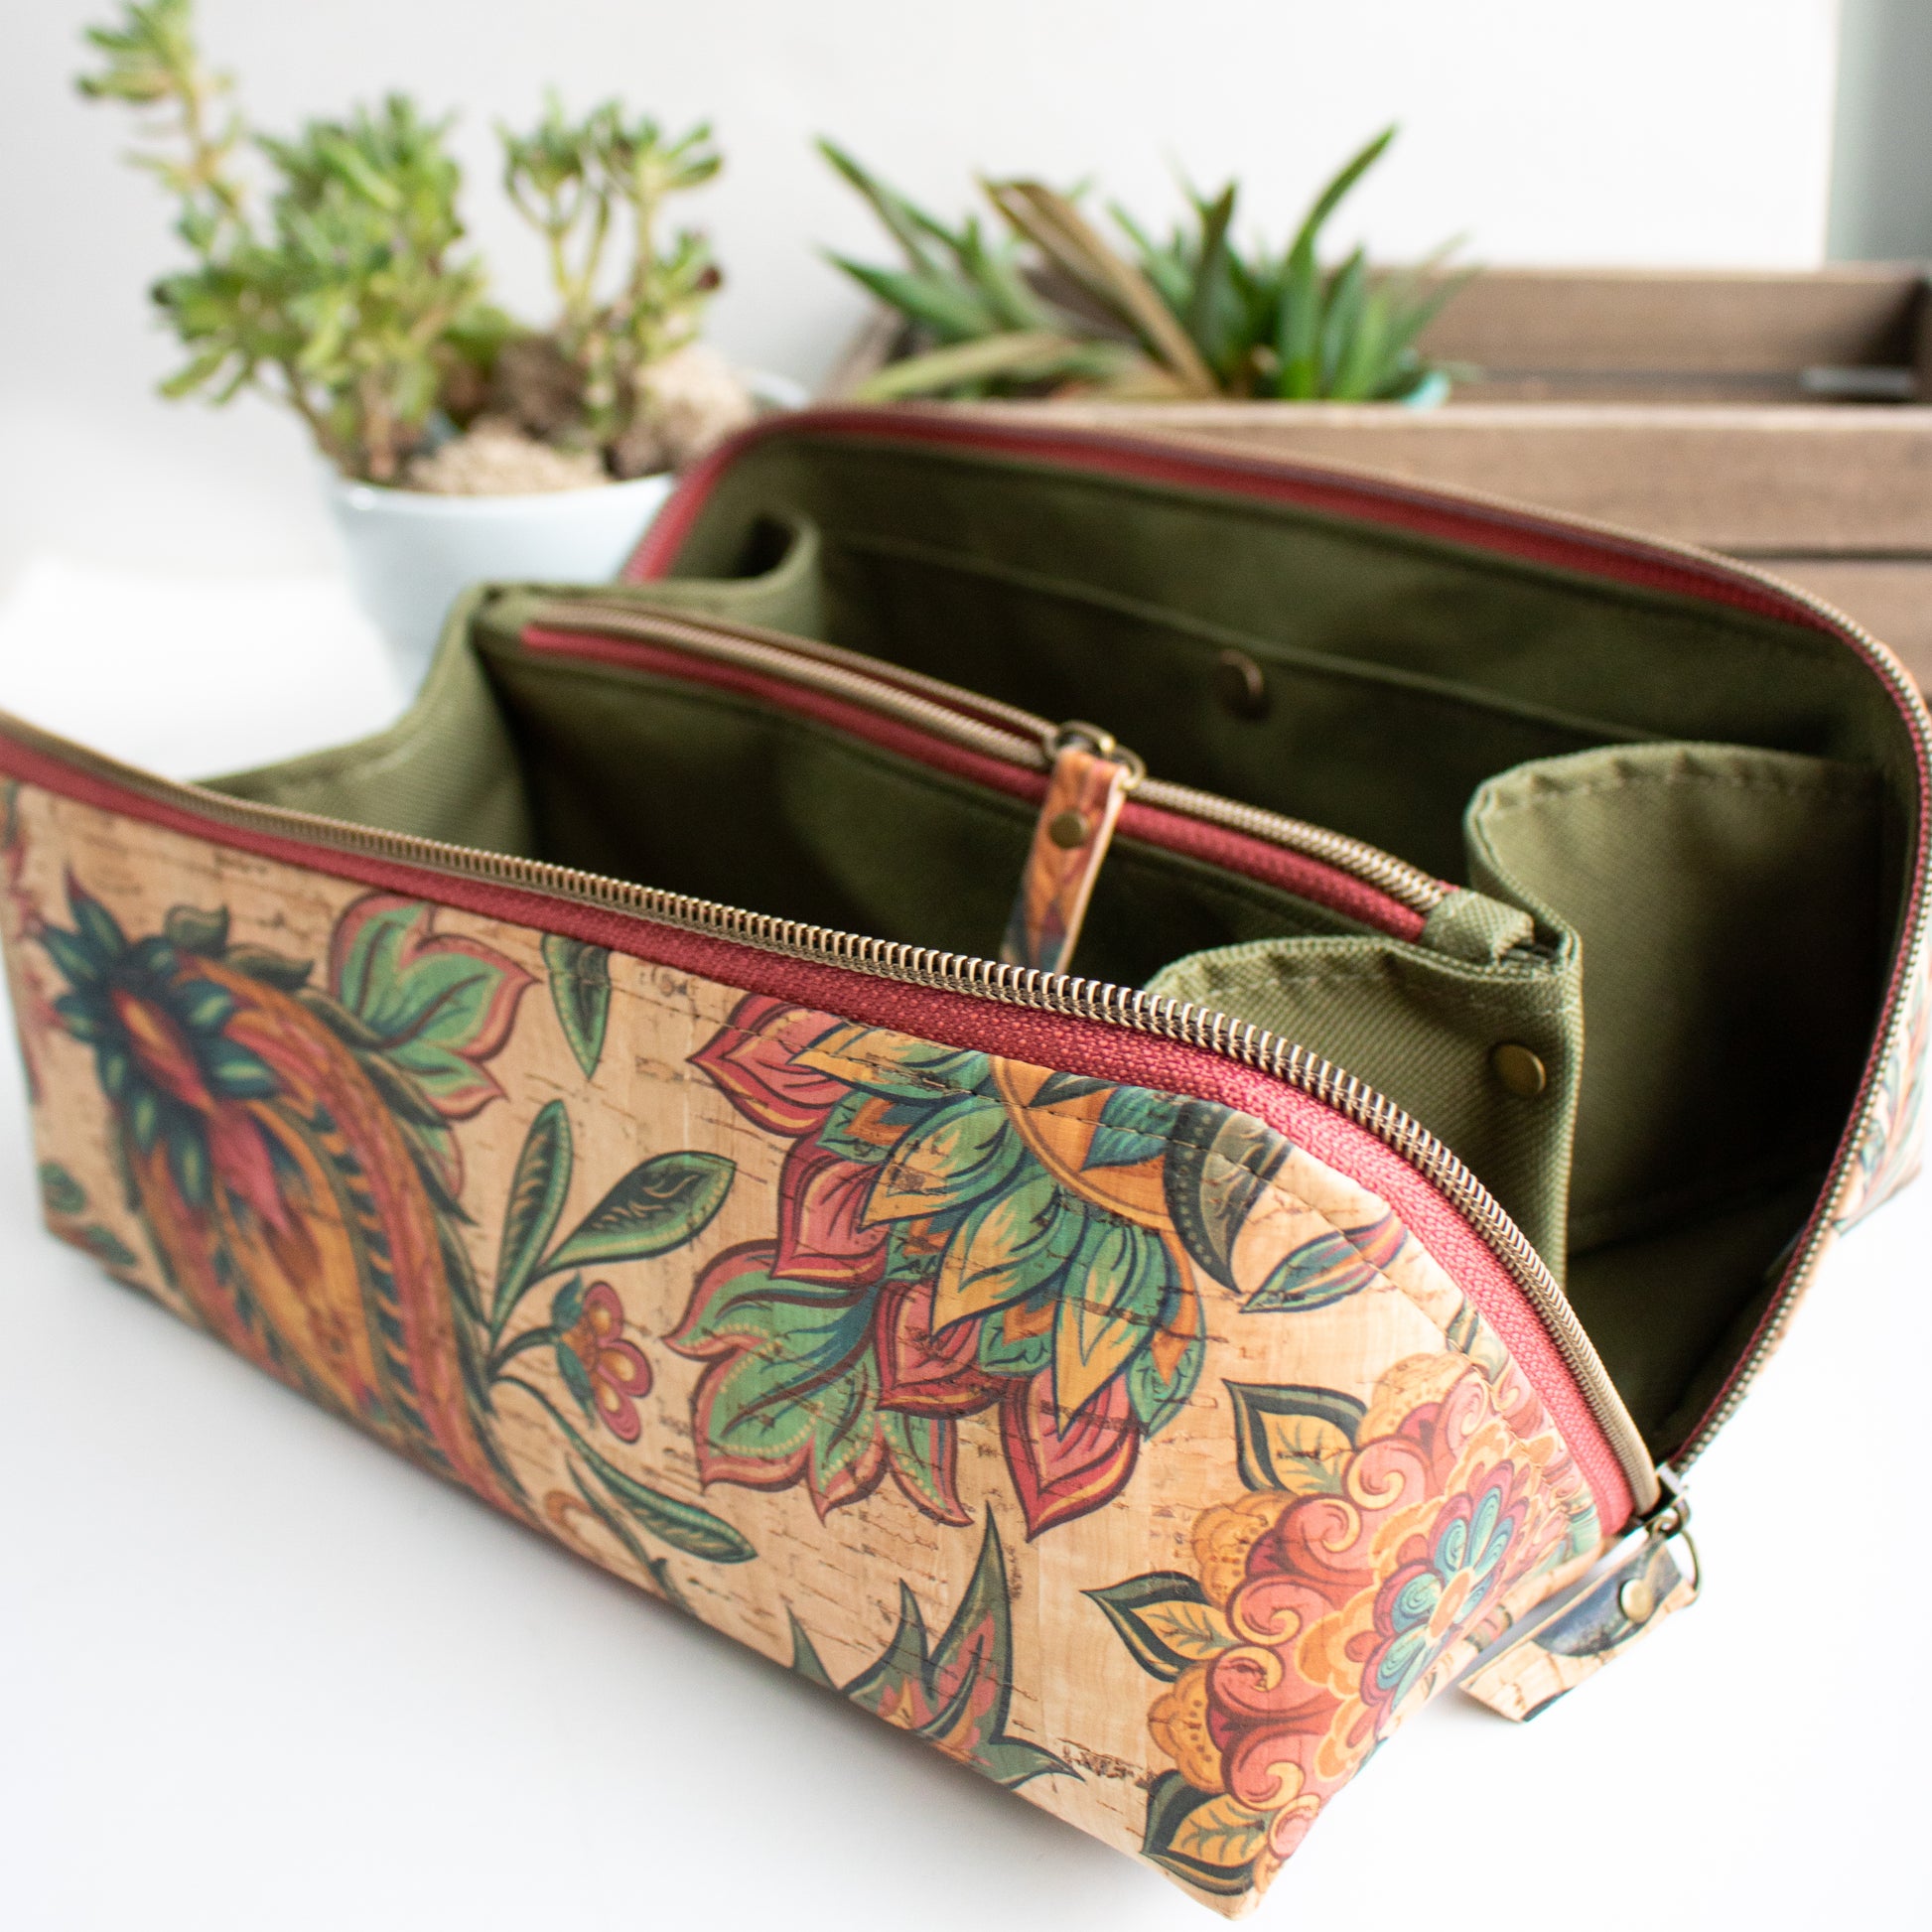 Carry Bag Case Embroidery Tool Storage Handbag Organizer Round With Pockets  Compartments For Accessories Leaves Pattern Carry Bag